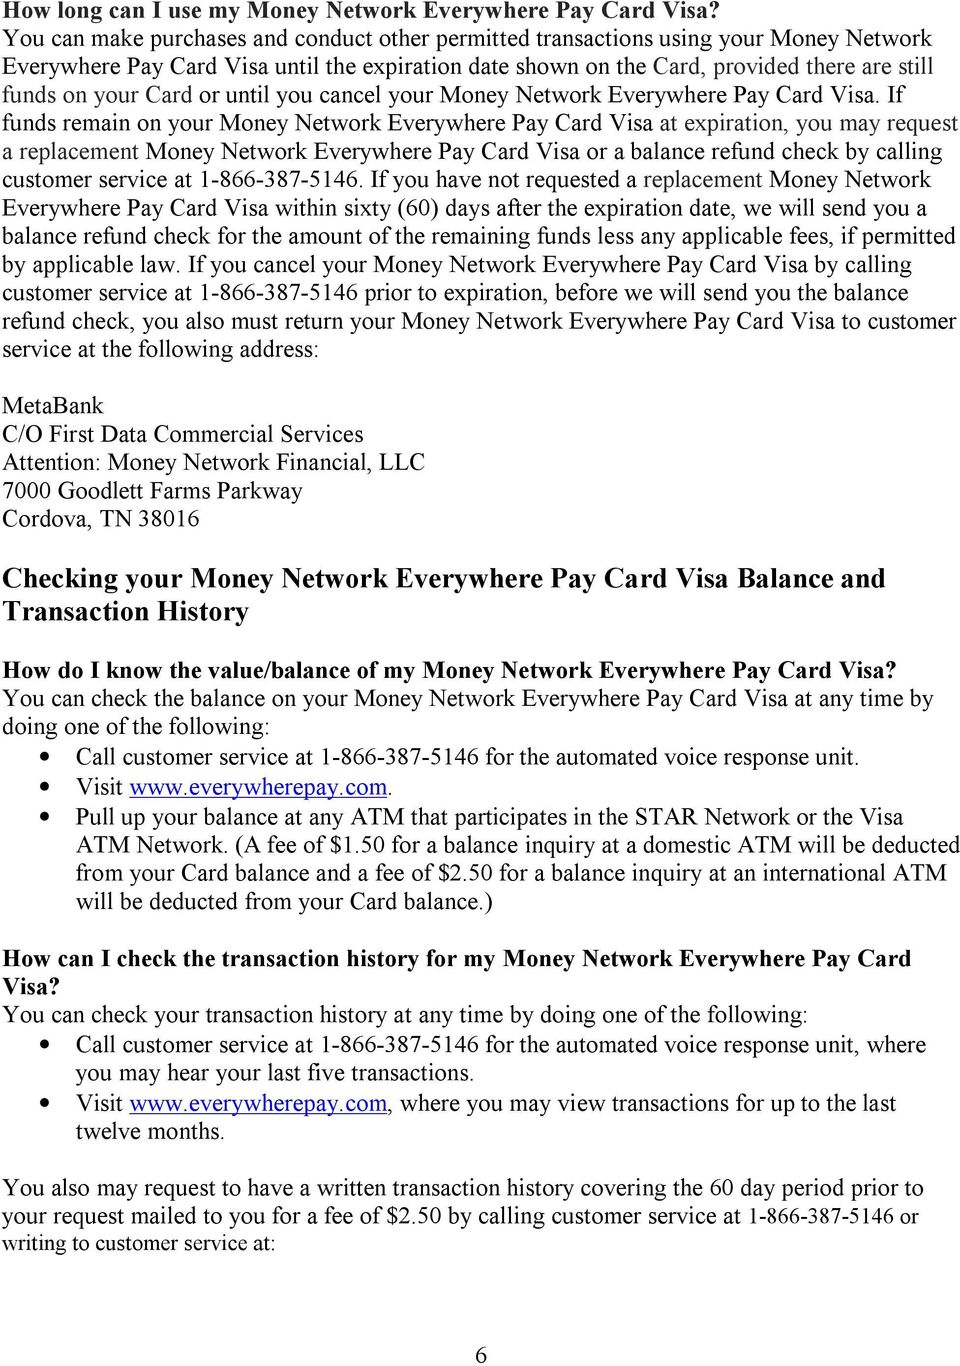 Card or until you cancel your Money Network Everywhere Pay Card Visa.